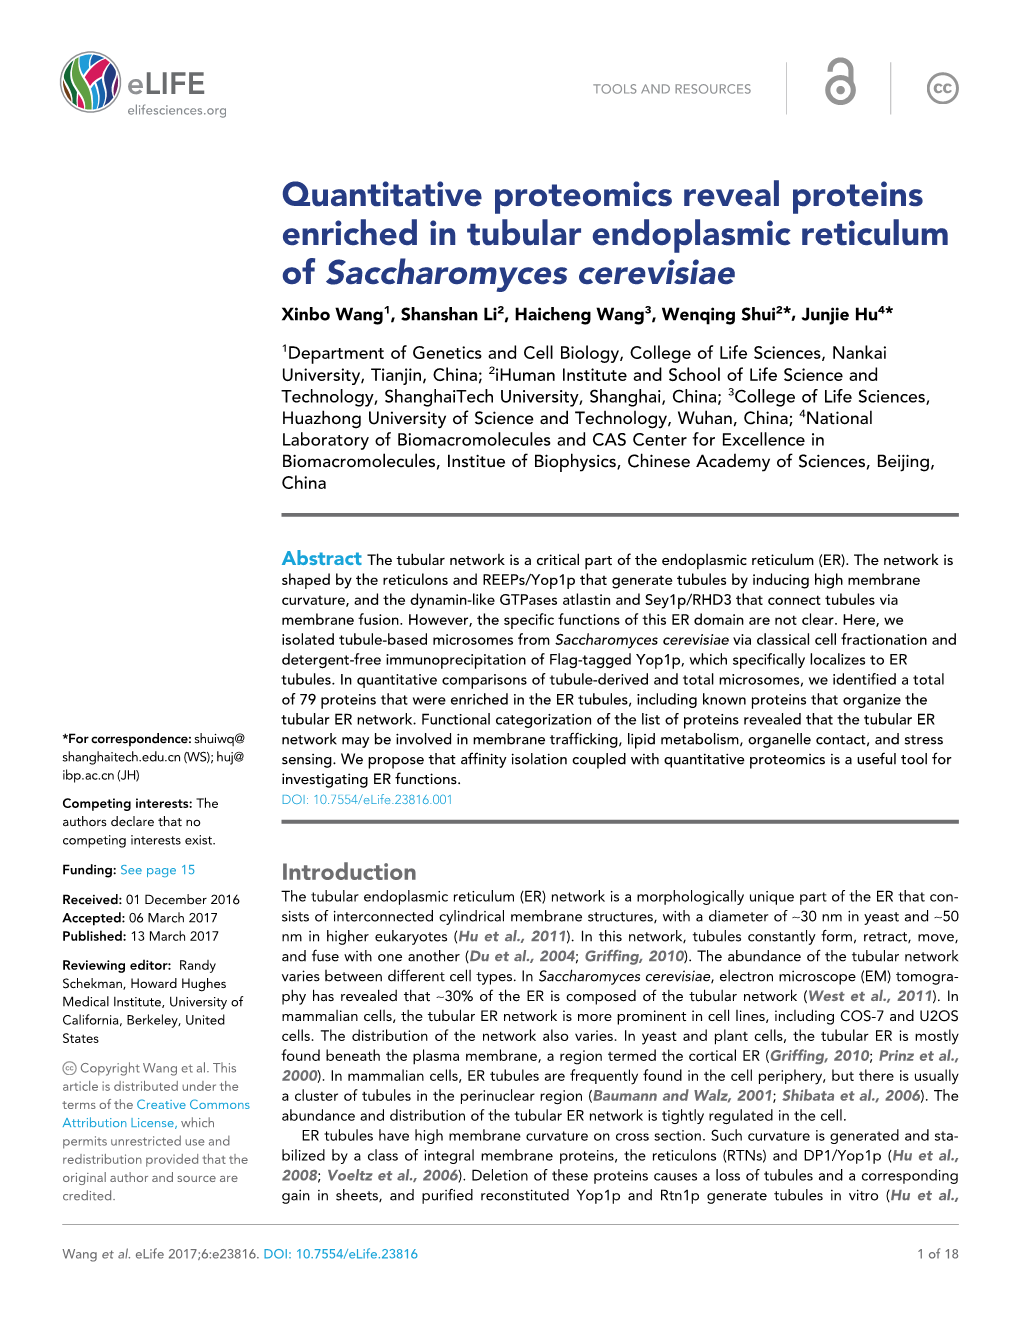 Quantitative Proteomics Reveal Proteins Enriched in Tubular